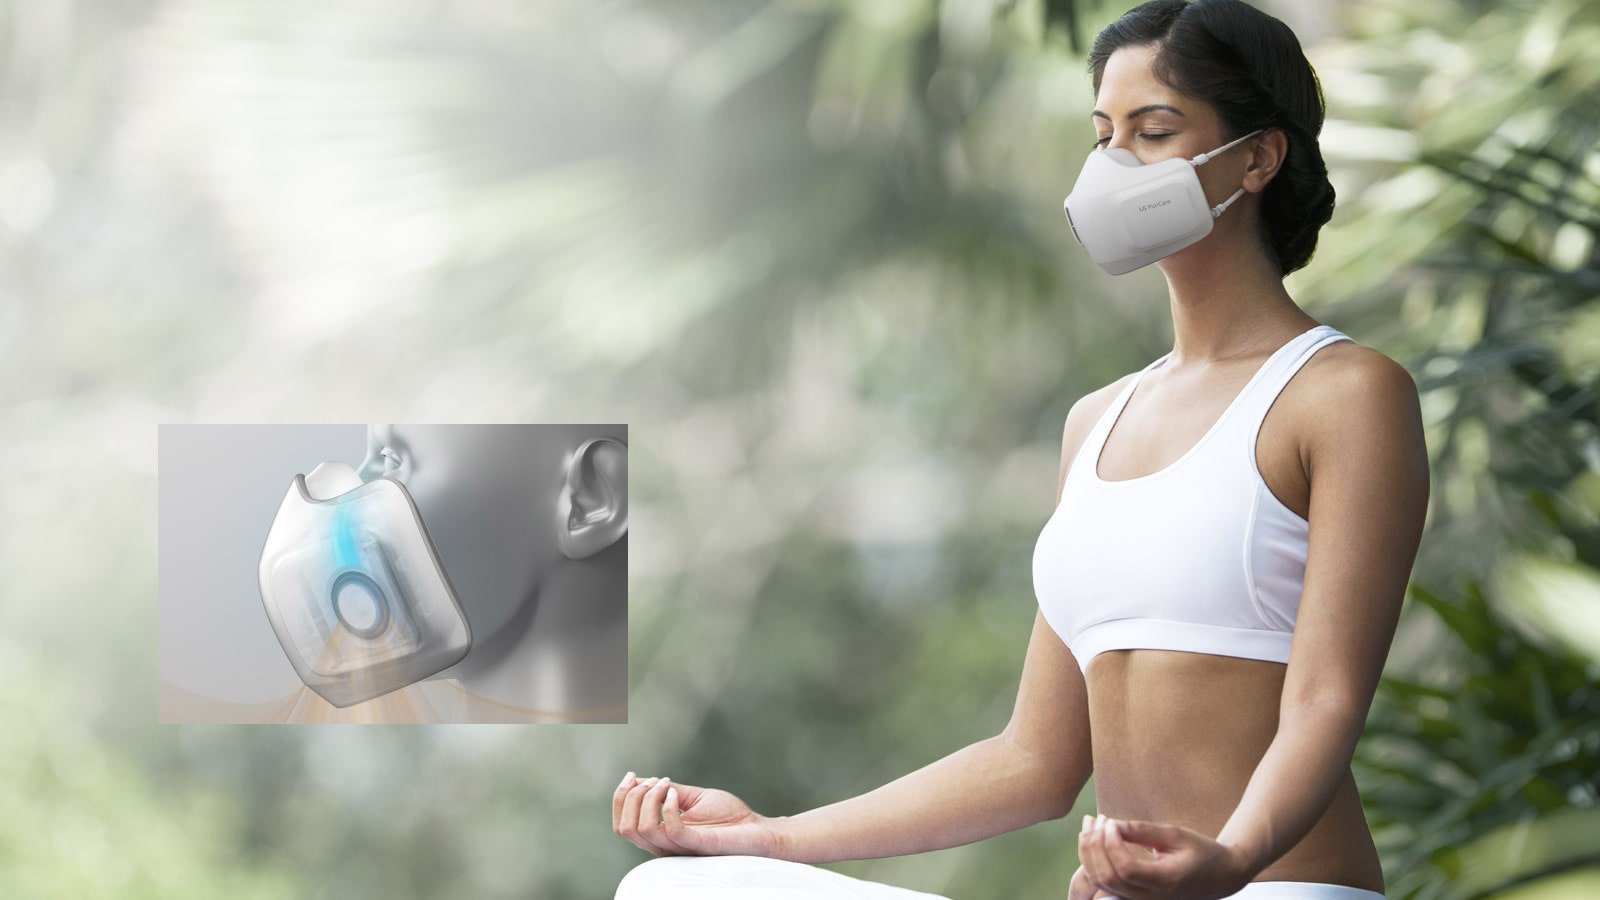 Breathe comfortably with your wearable air purifier